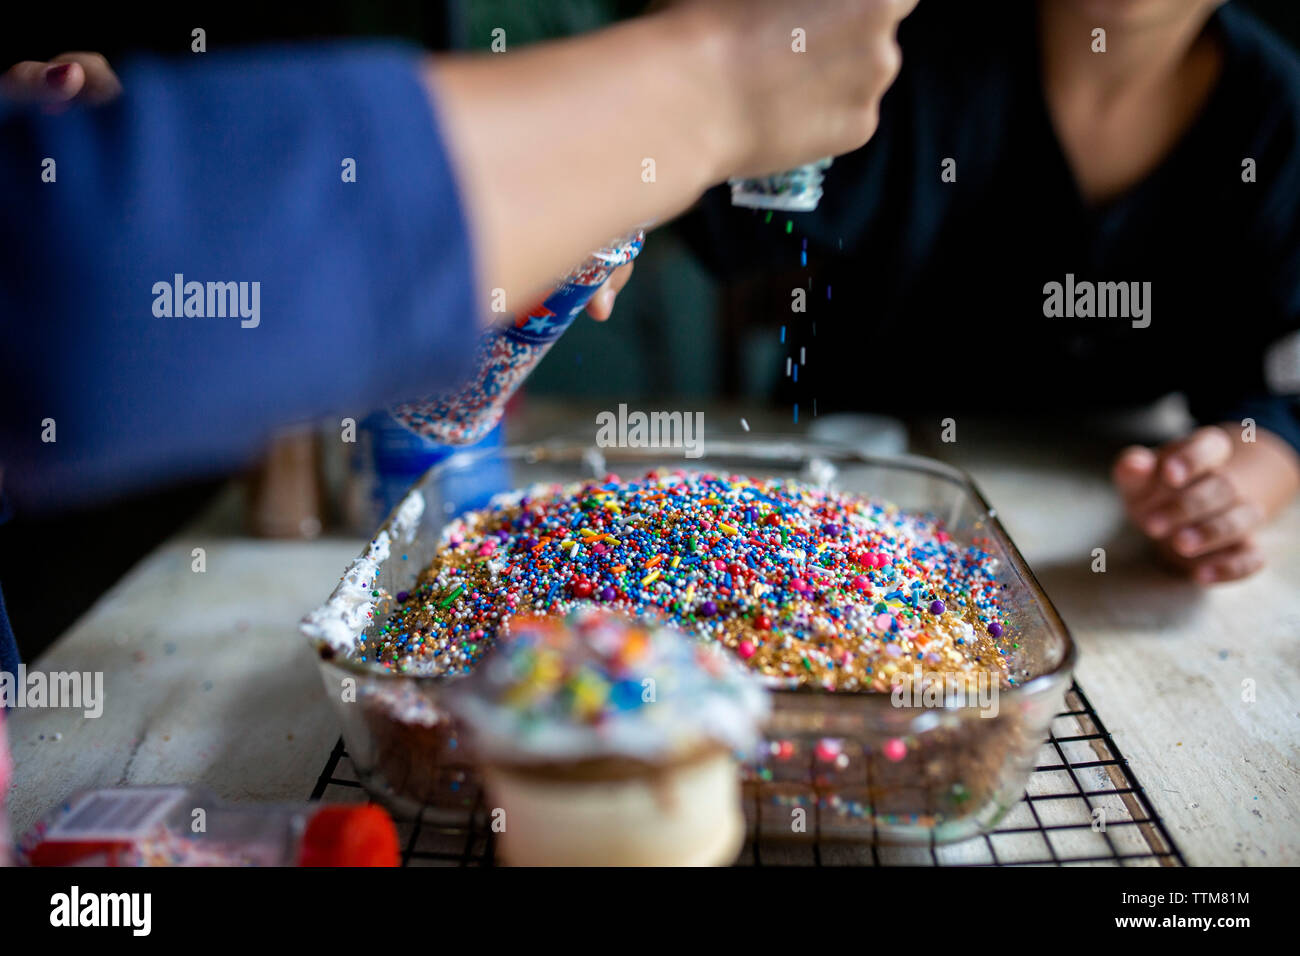 Siblings decorating cake with plenty of colorful sprinkles Stock Photo